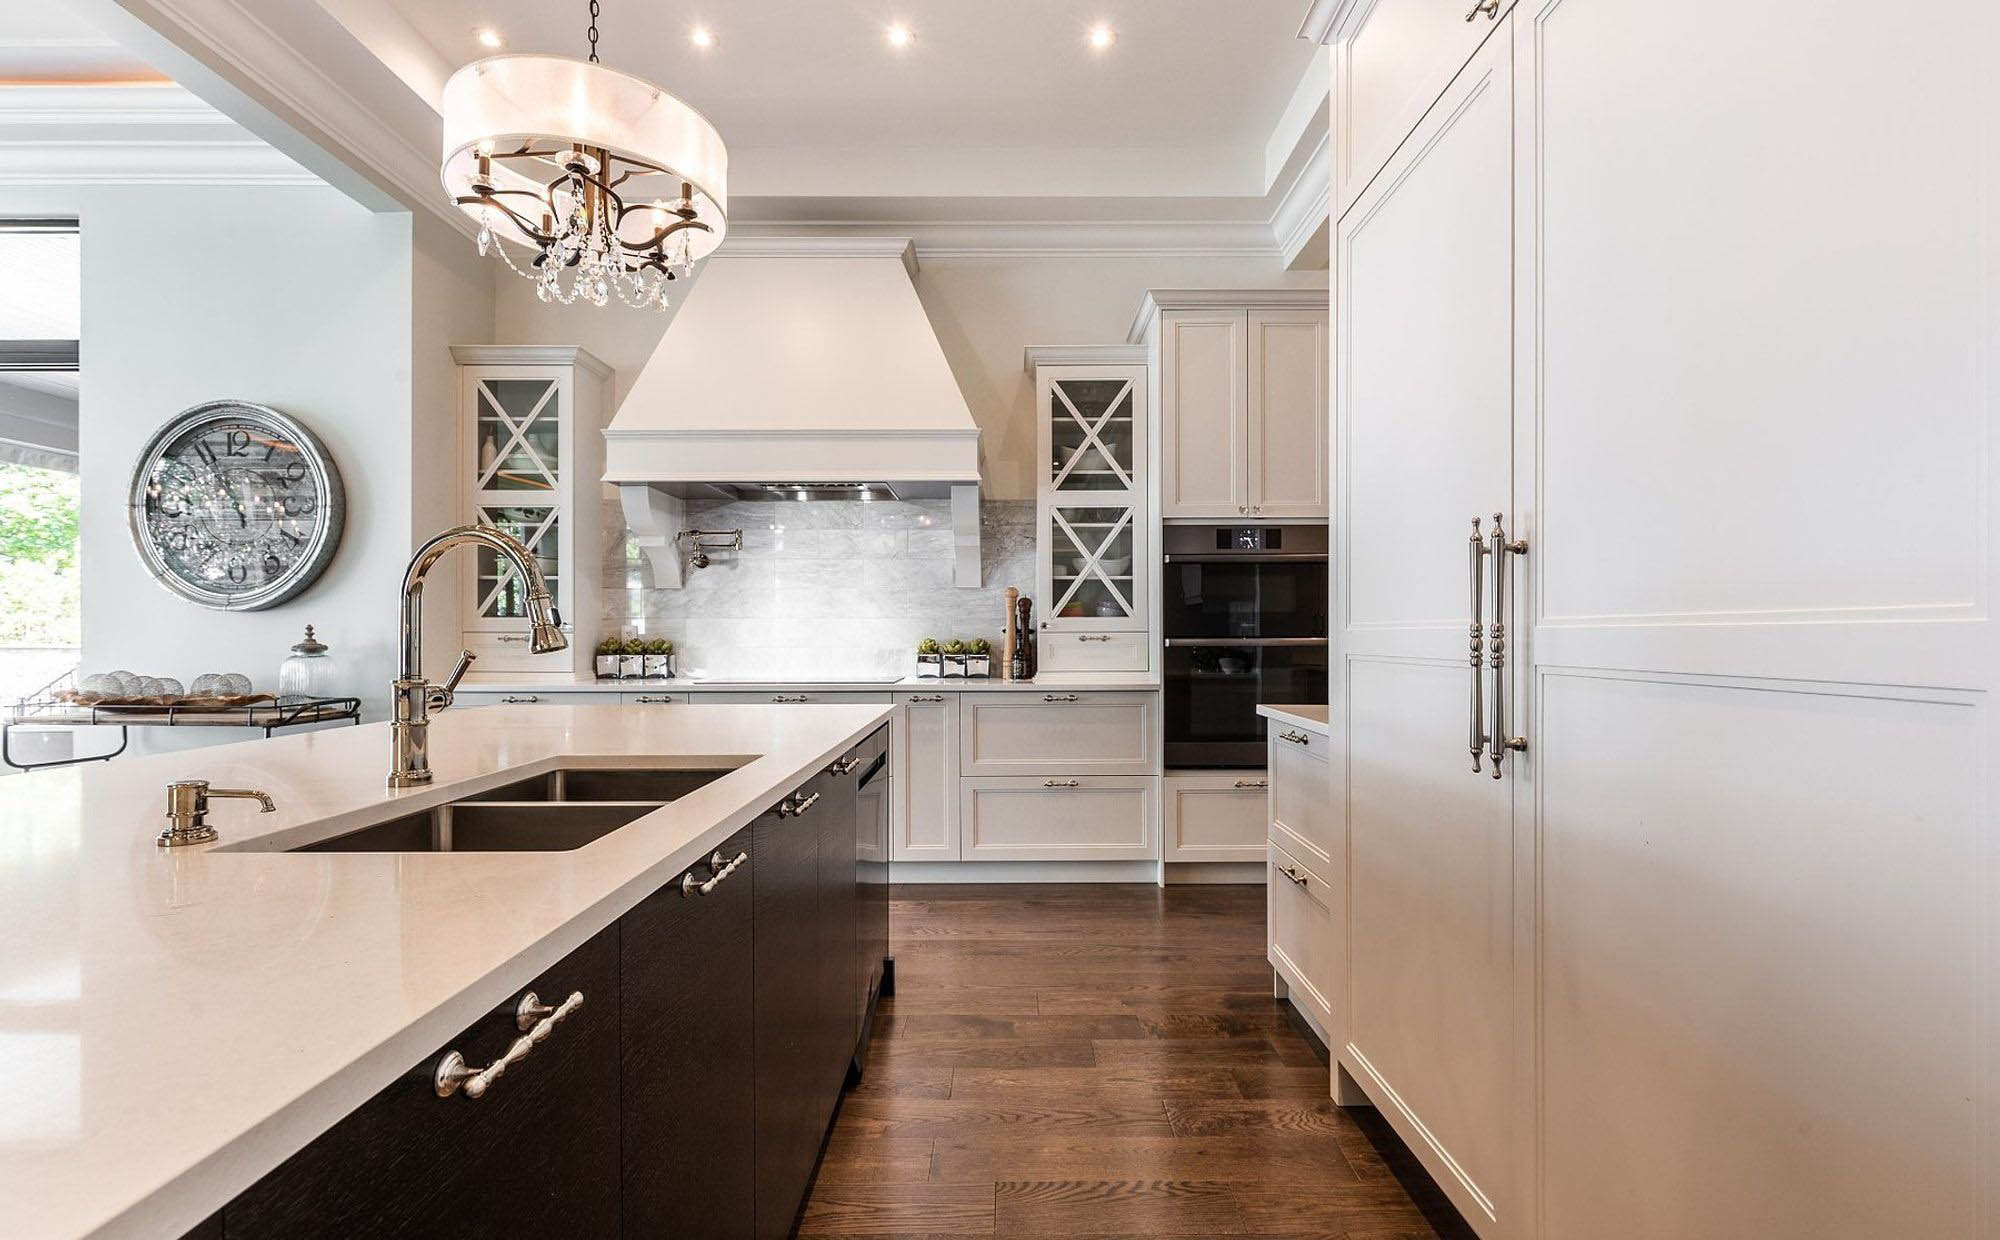 Fake wood oak tile flooring in this beautiful luxury kitchen. White cabinets with a dark brown island.